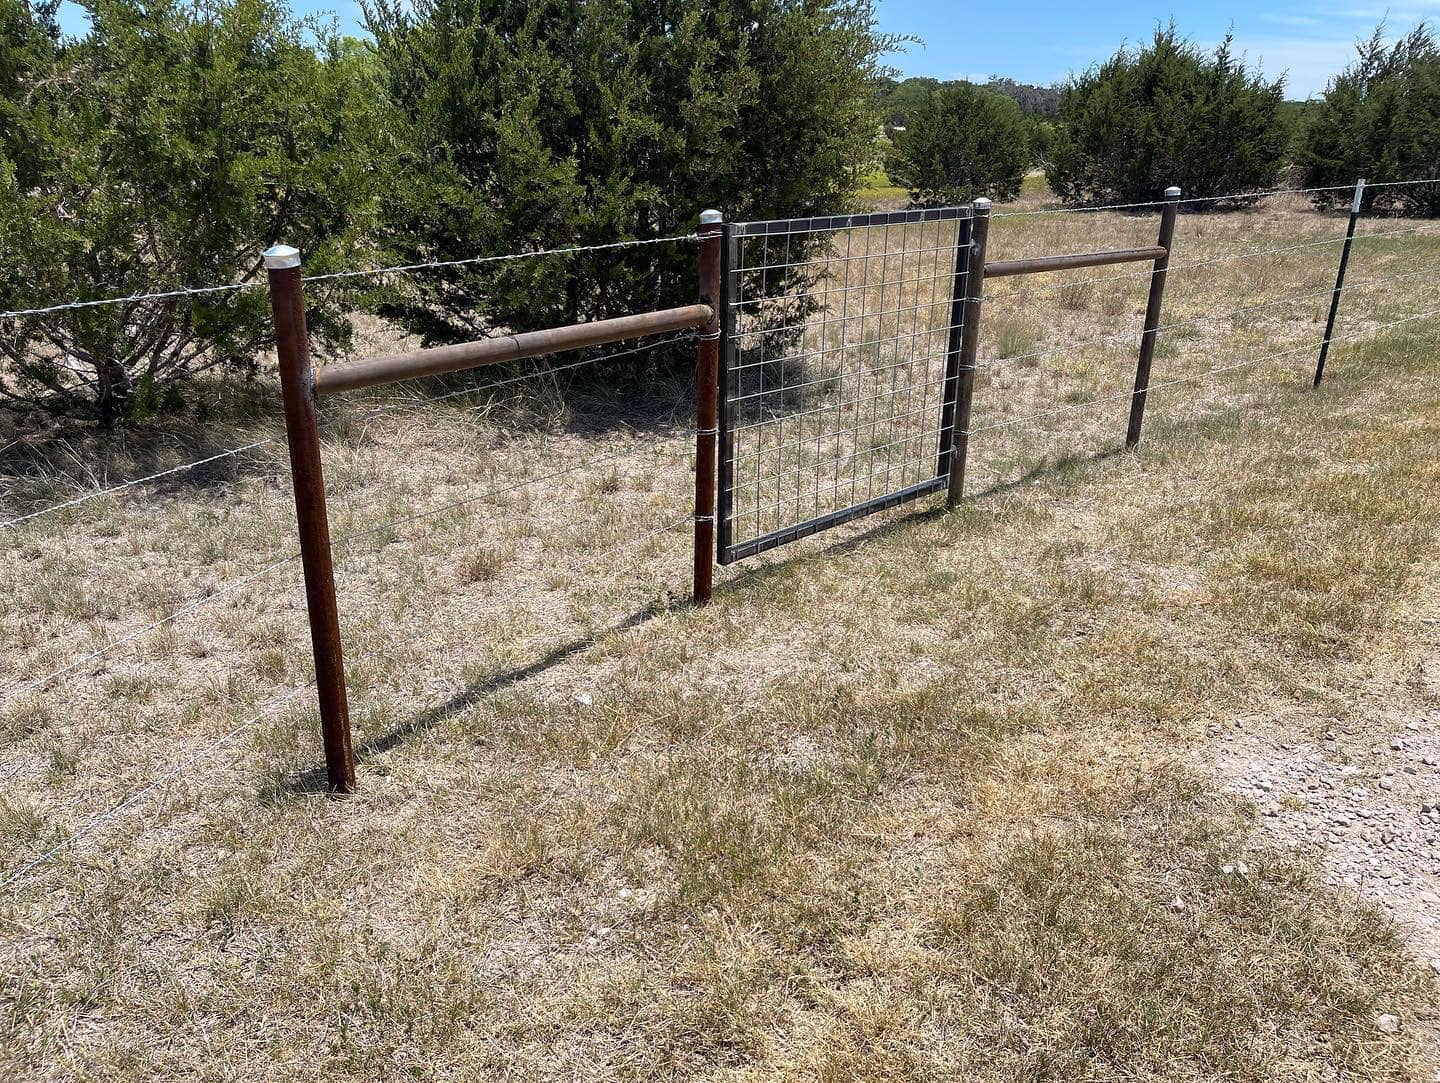 4 wire barb wire fence with t-post and 2 3/8 drill pipe